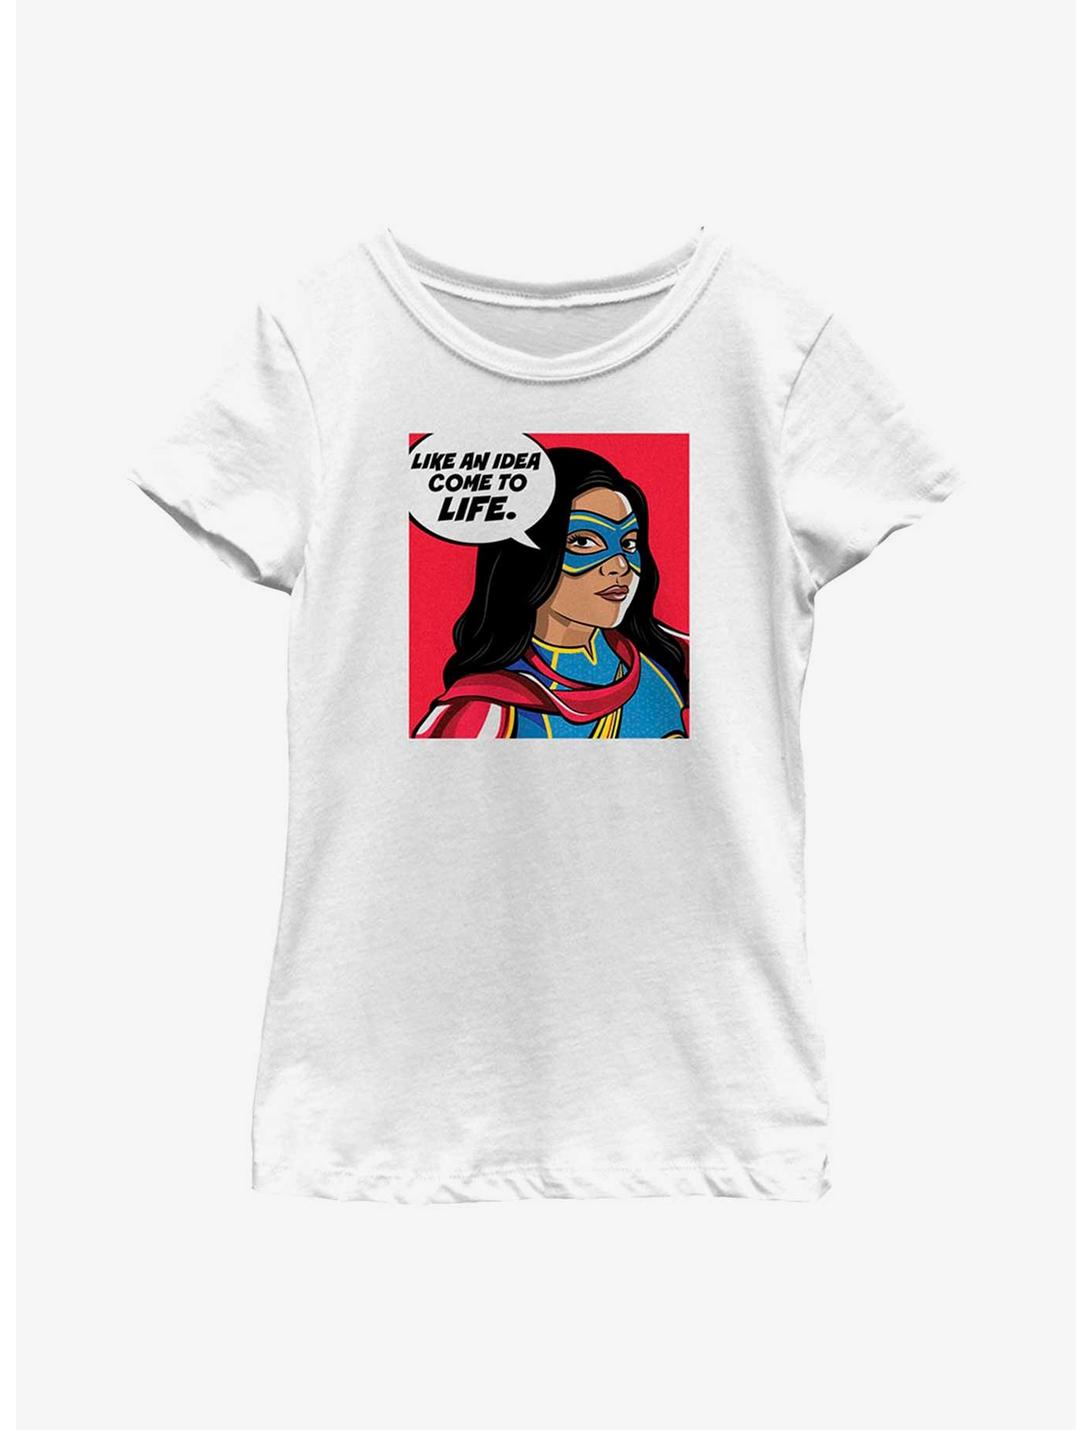 Marvel Ms. Marvel Idea Come To Life Youth Girls T-Shirt, WHITE, hi-res